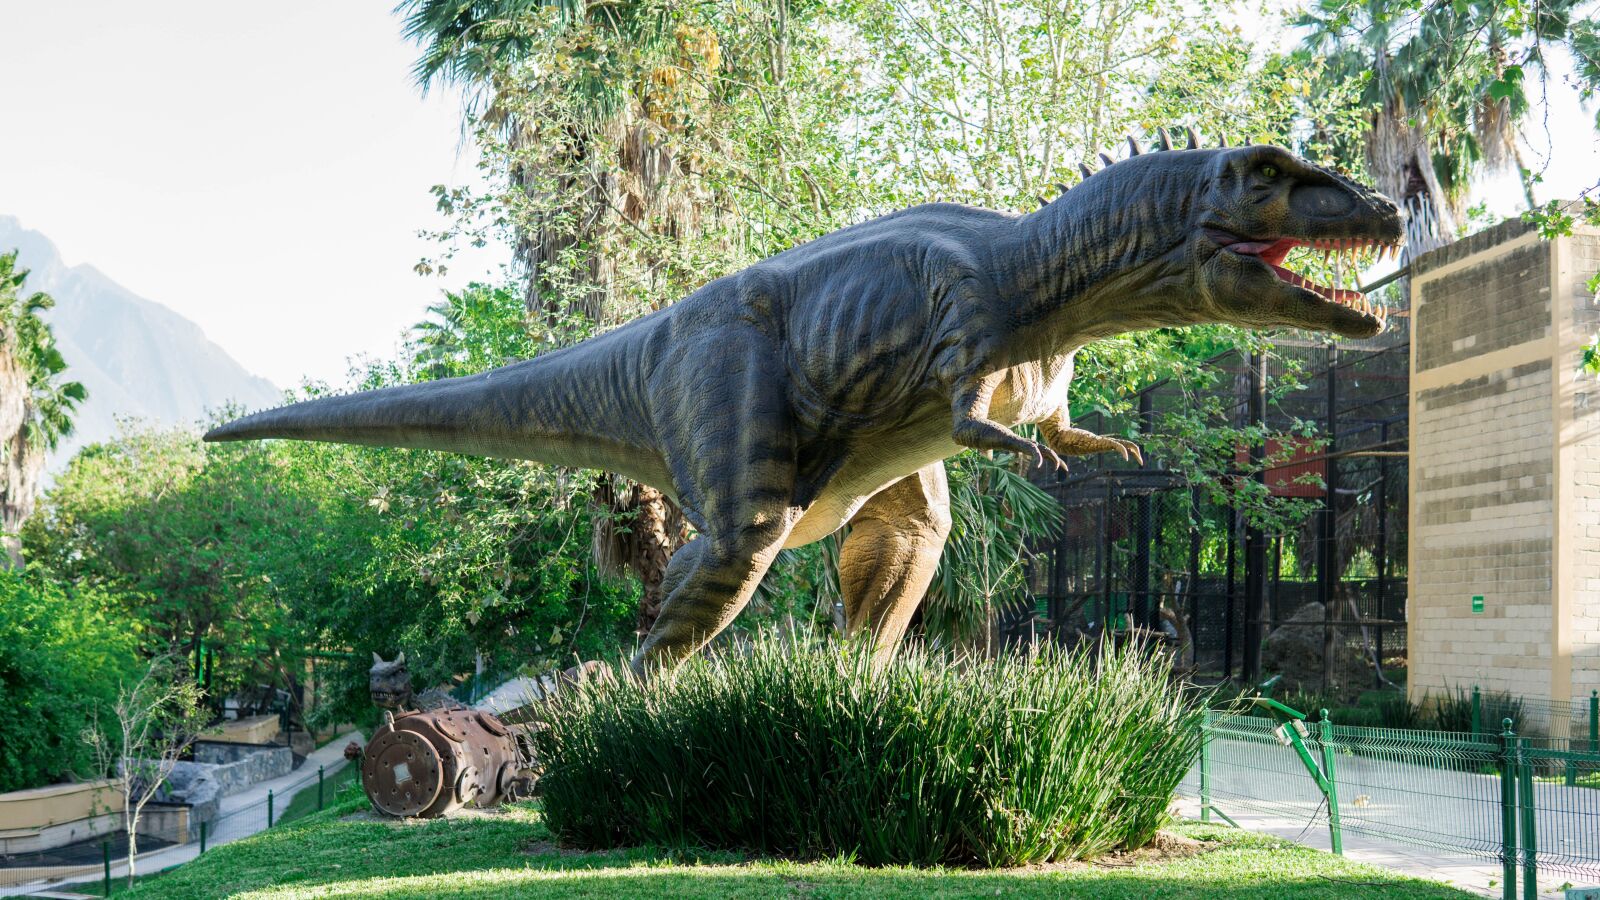 Sony a6000 sample photo. Dinosaurs, dino, reptile photography